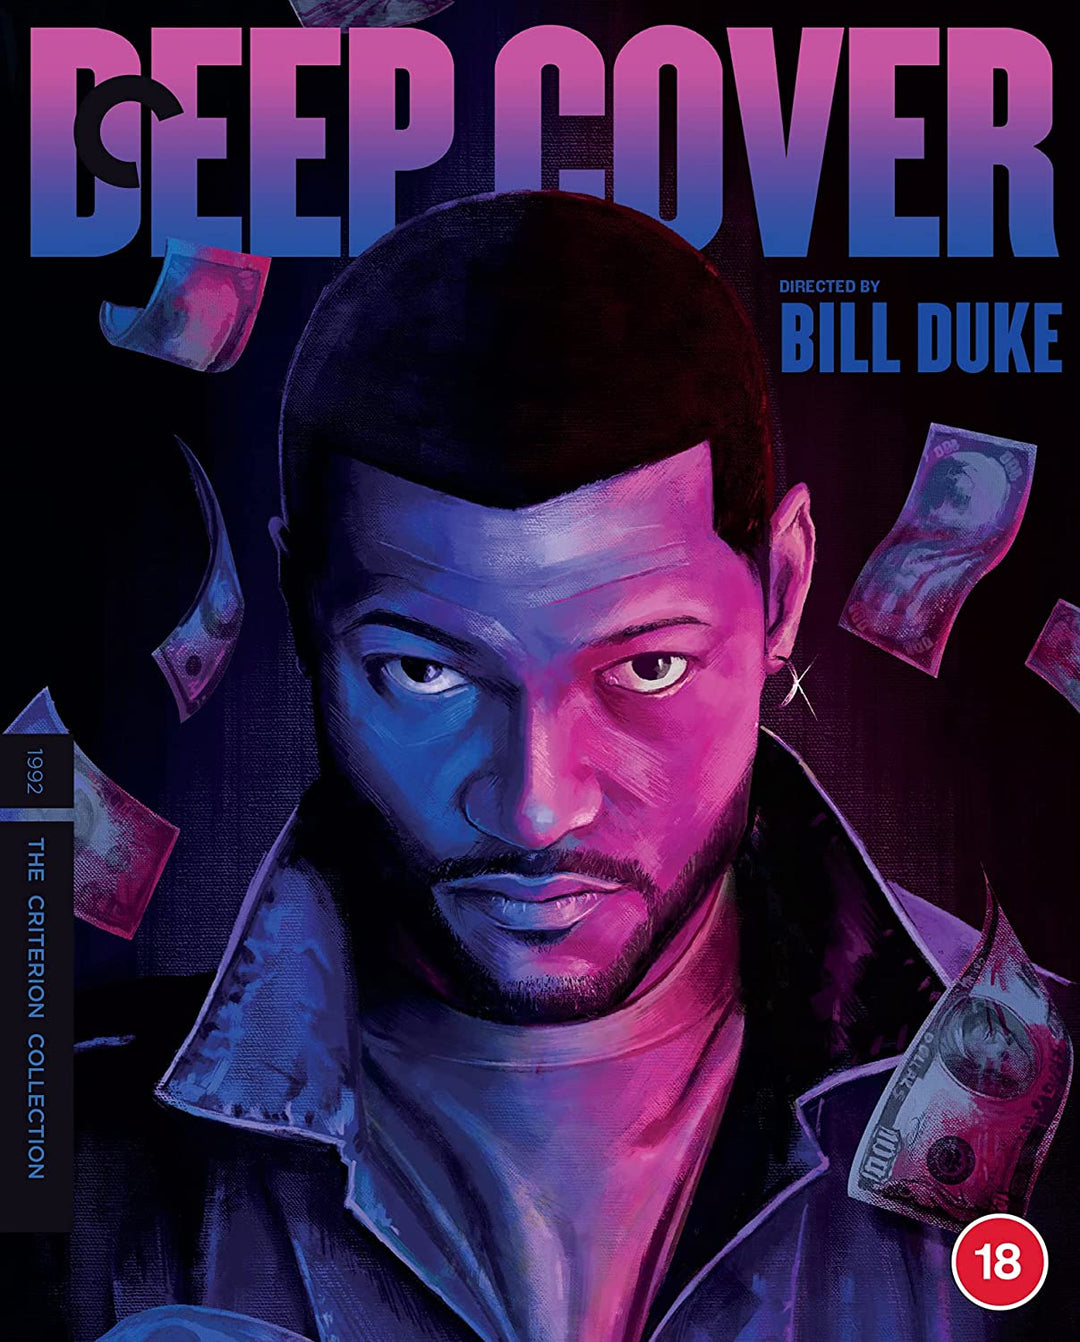 Deep Cover (1992) (Criterion Collection) UK Only - [Blu-ray]